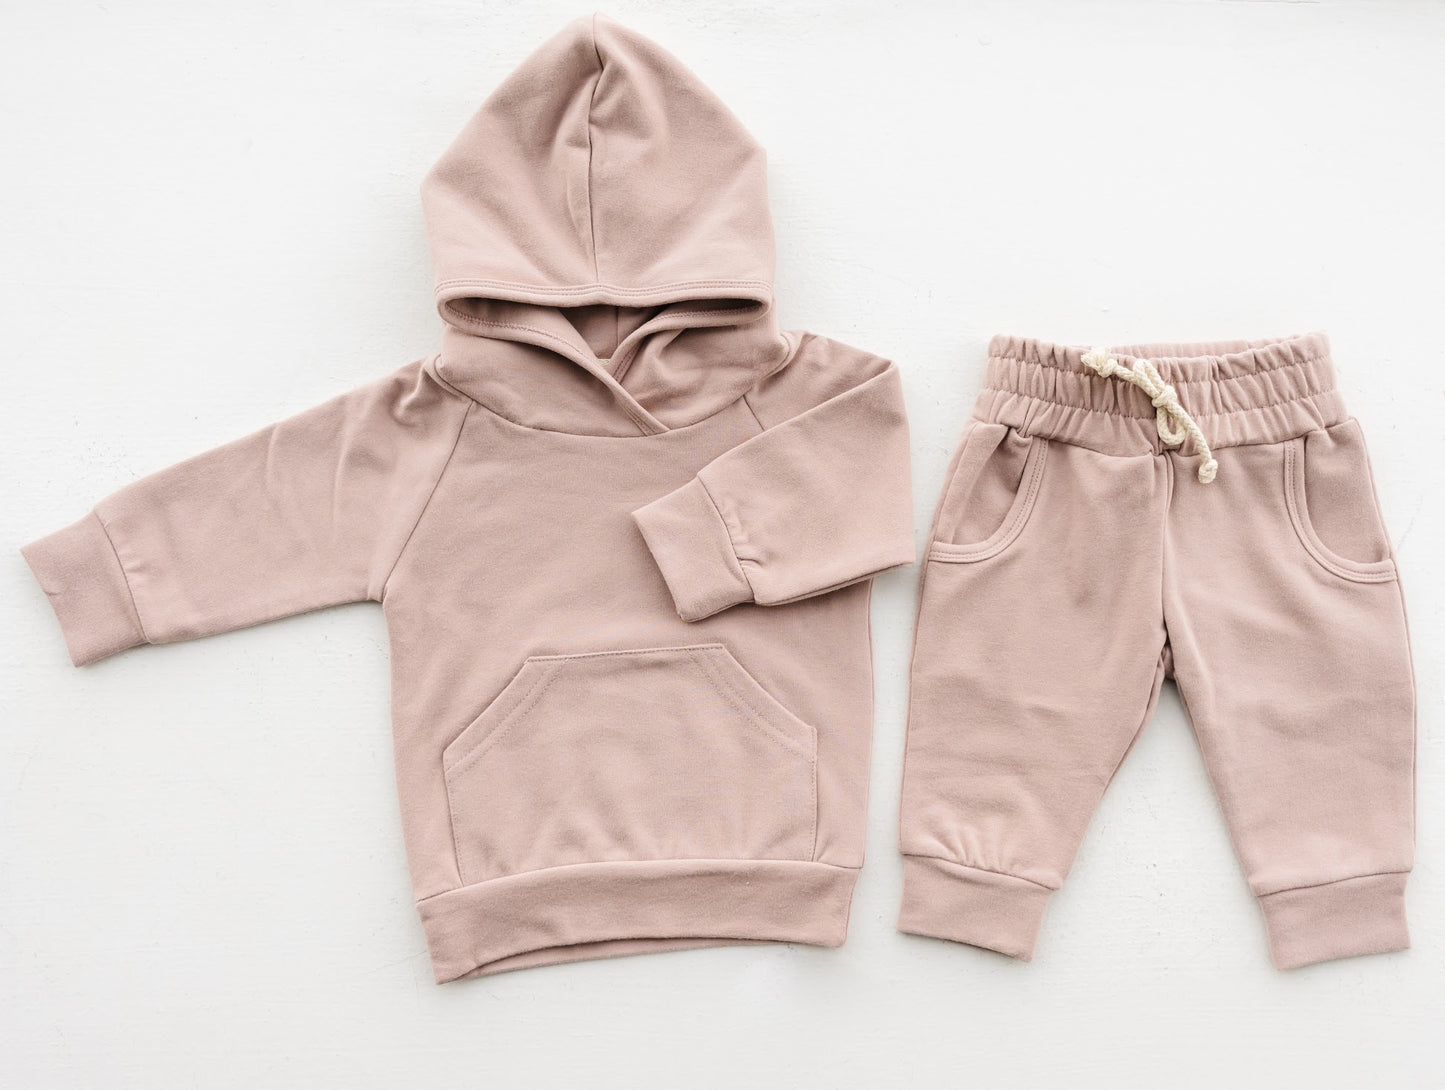 ULTIMATE JOGGER IN DUSTY MAUVE